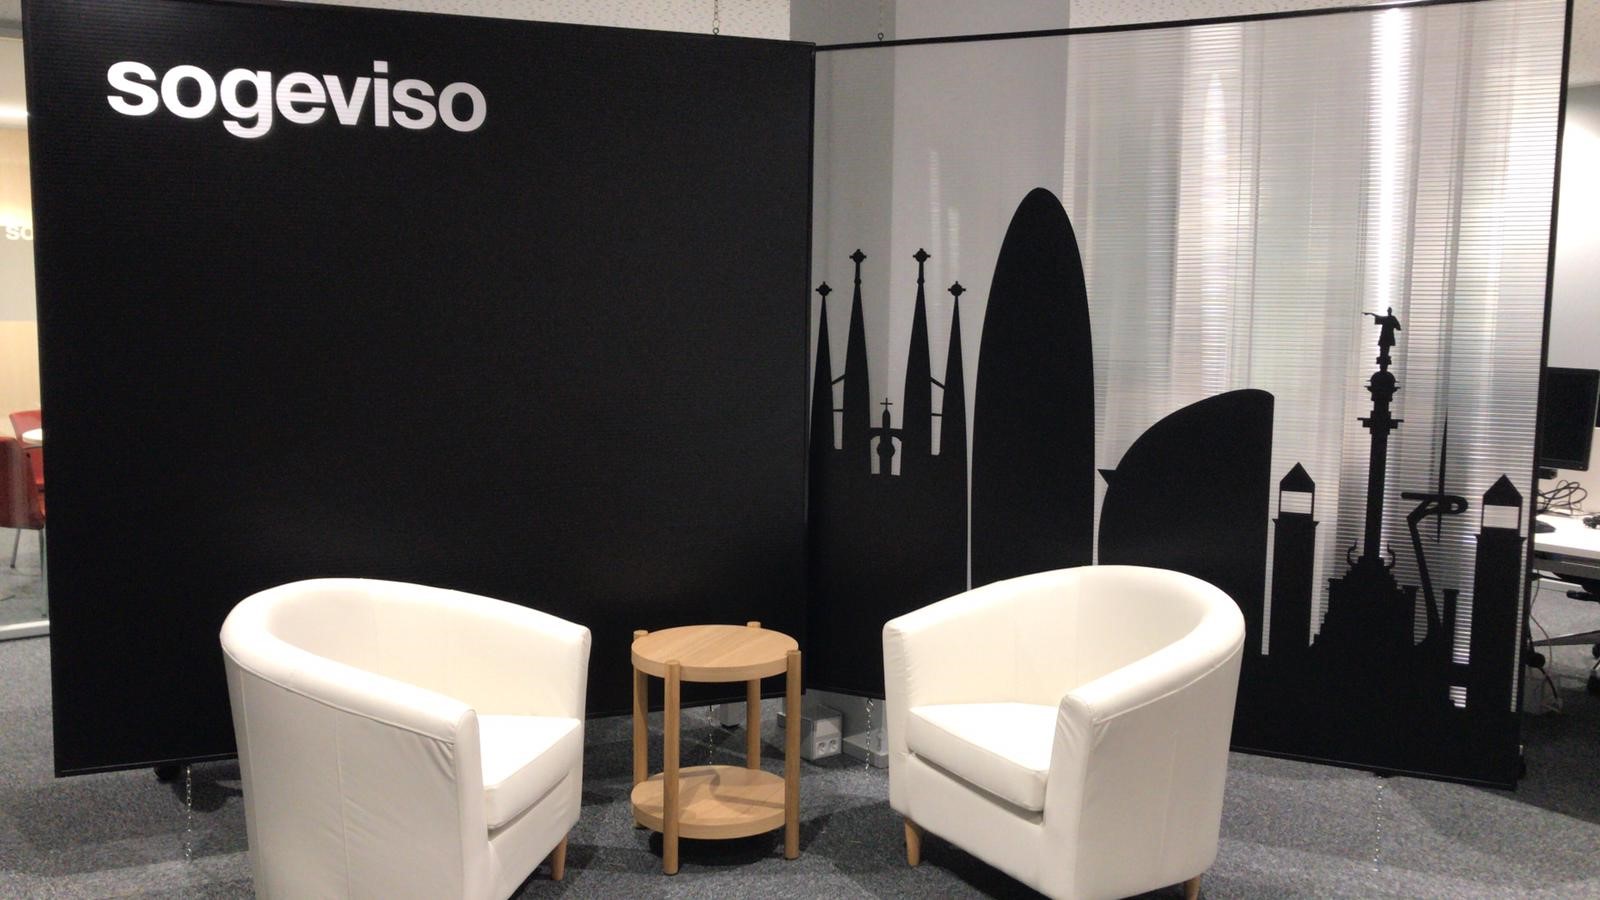 Sogeviso opens a new office in Barcelona.